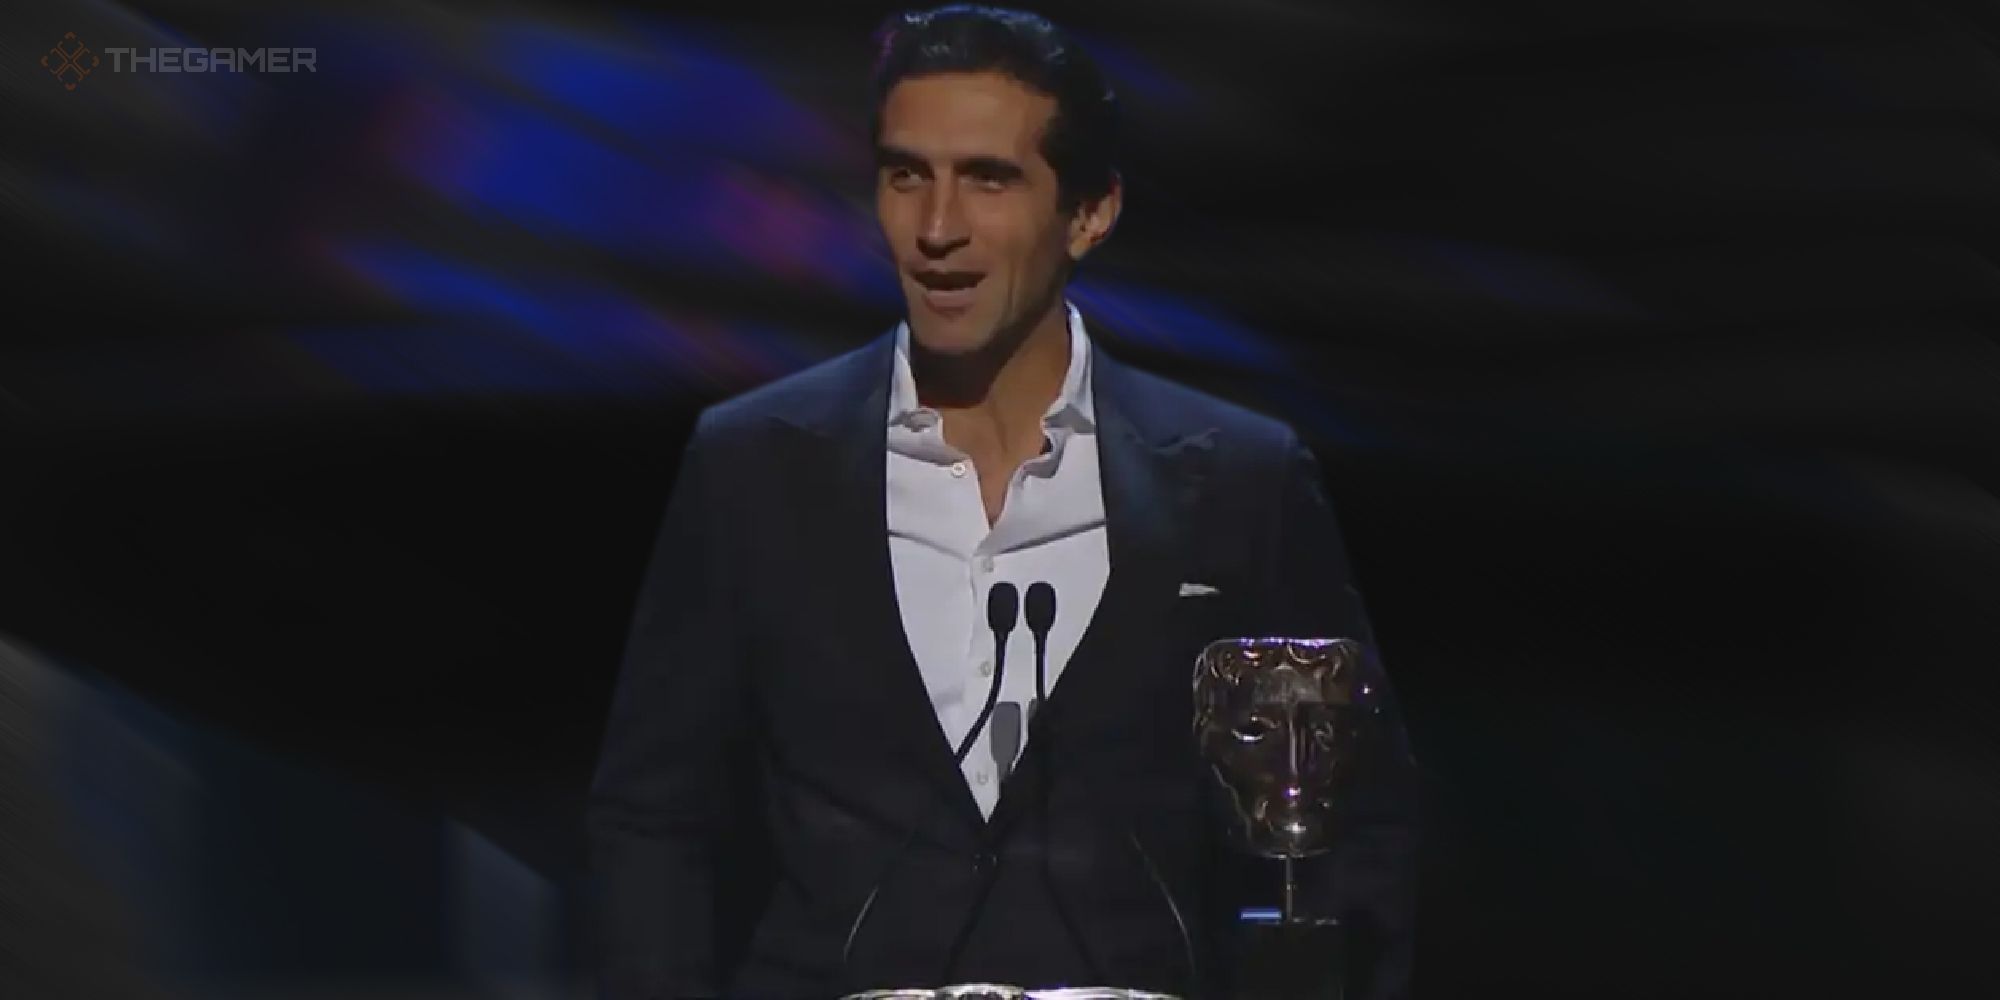 It Takes Two is a love letter to Nintendo, according to Josef Fares